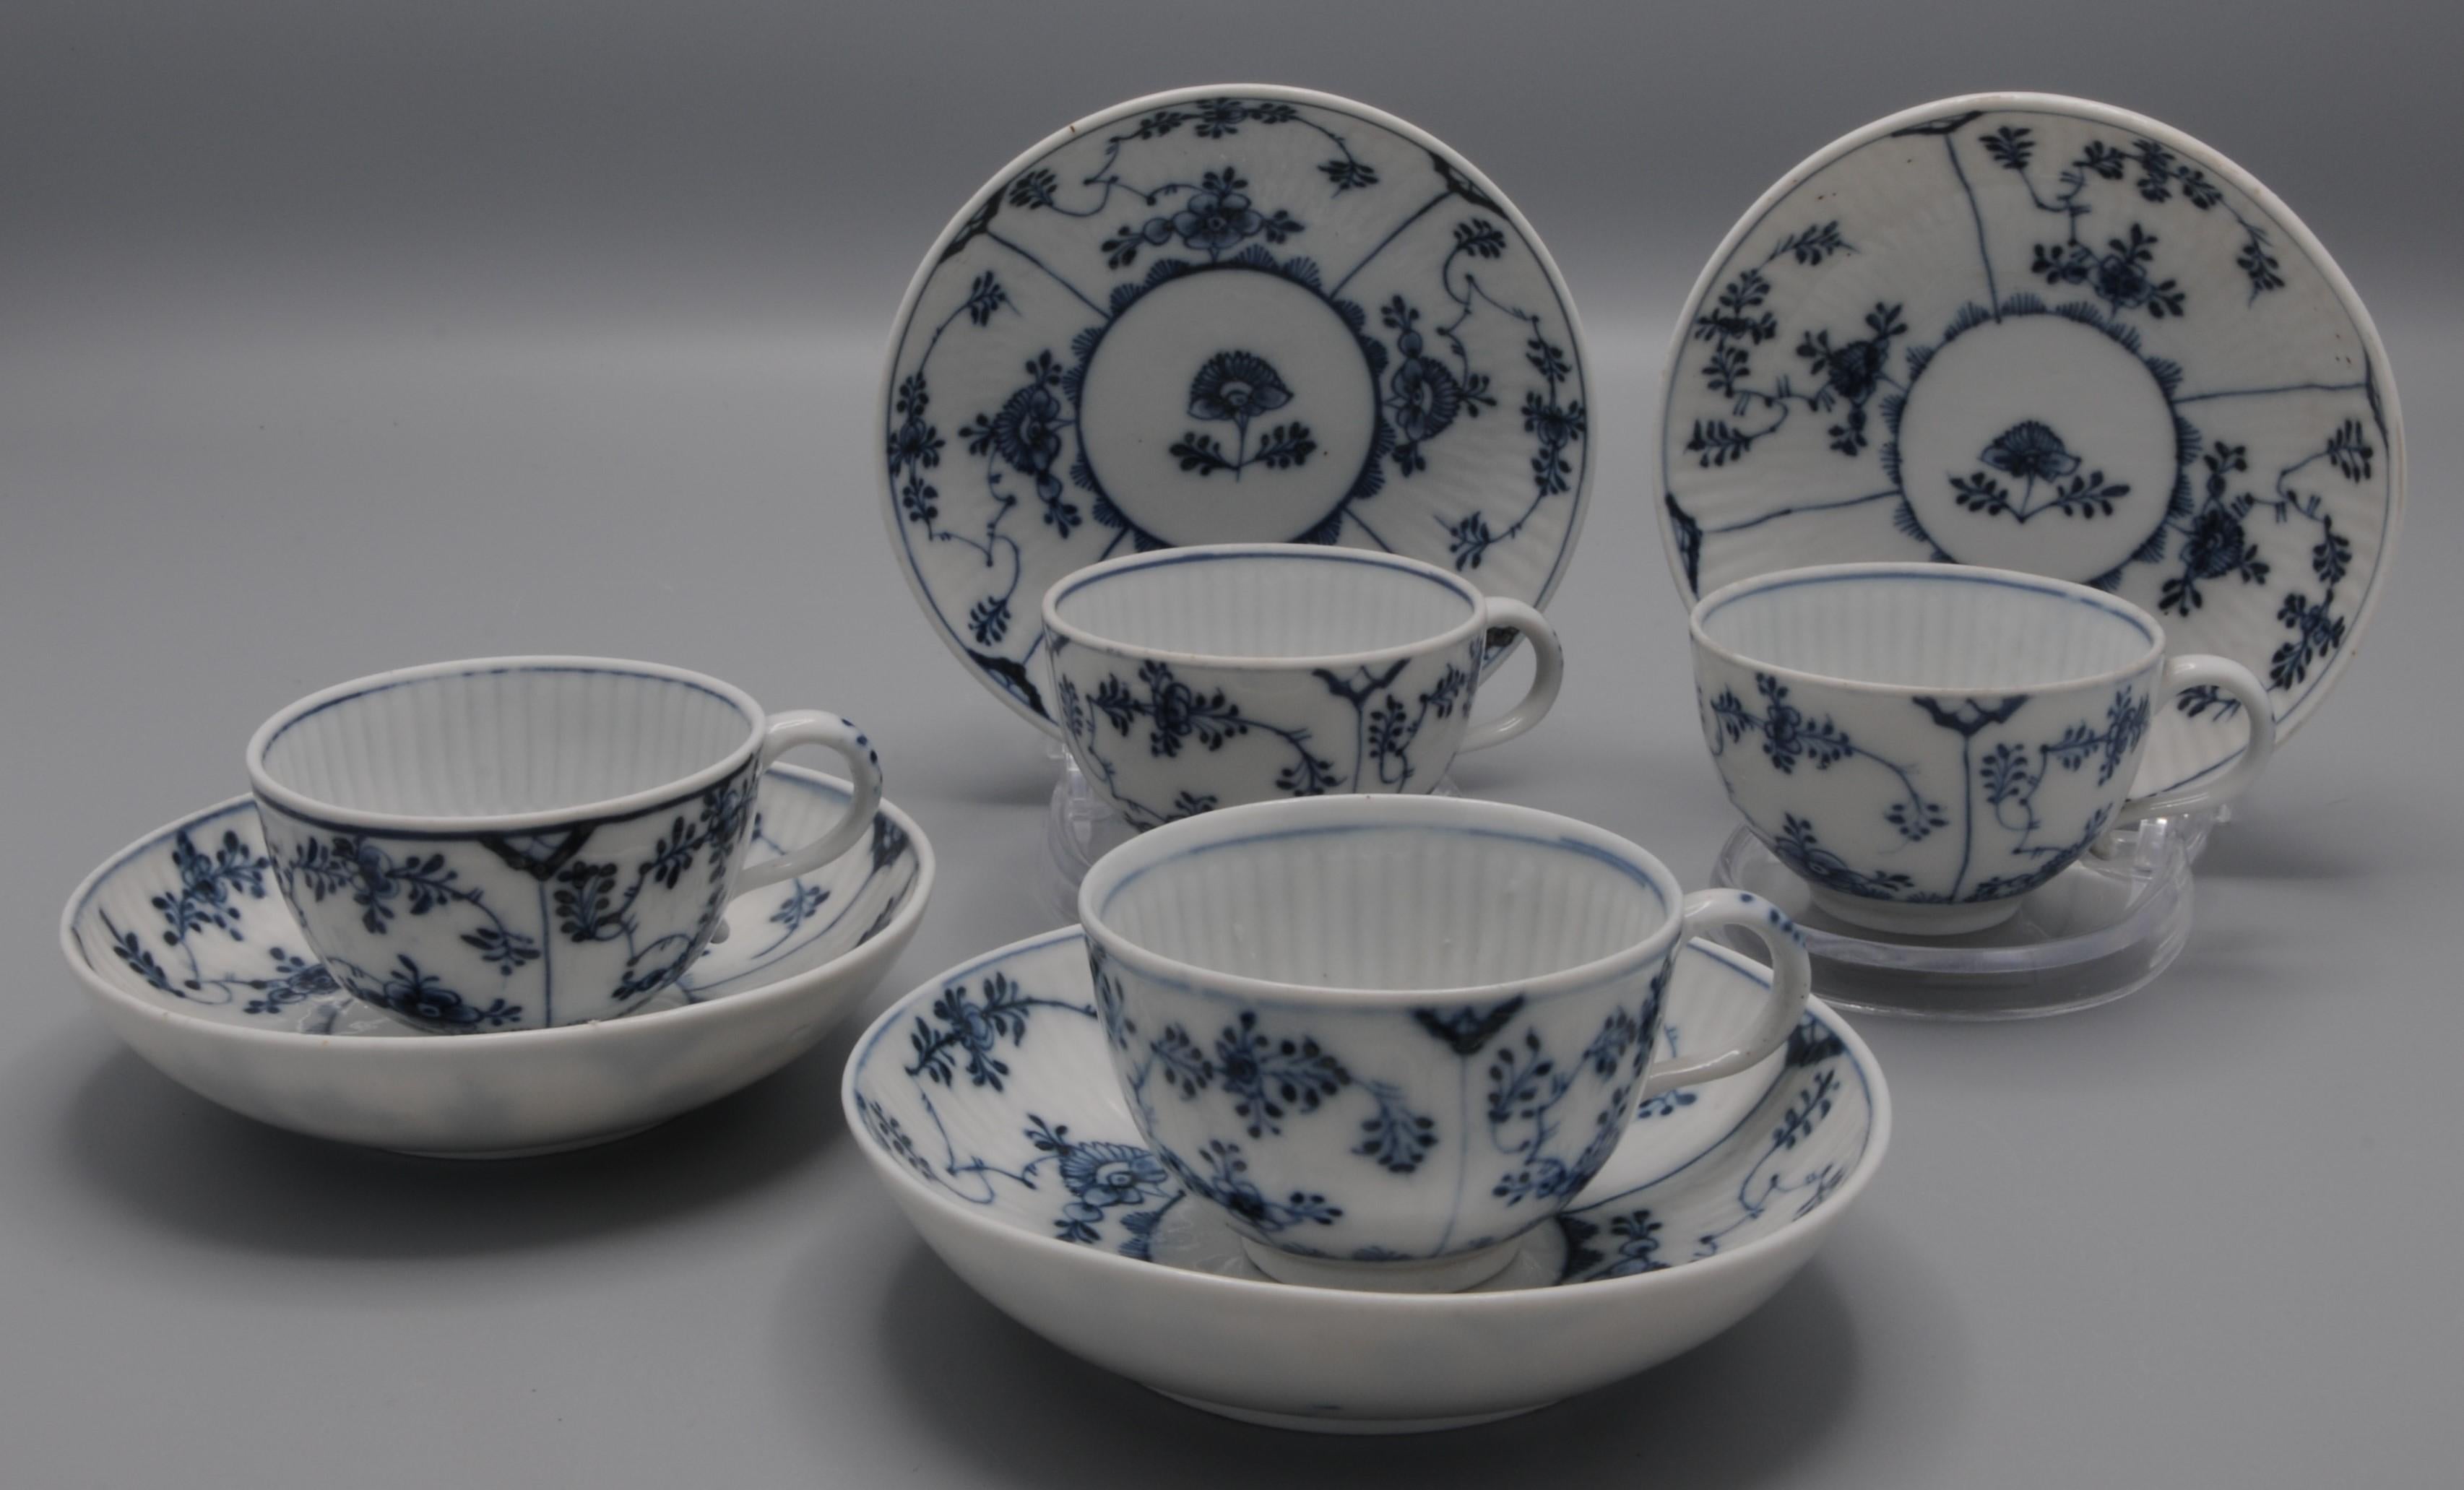 Porcelain Meissen - 4 cups and saucers 'Strohblumenmuster', Marcolini period 1774-1814 For Sale